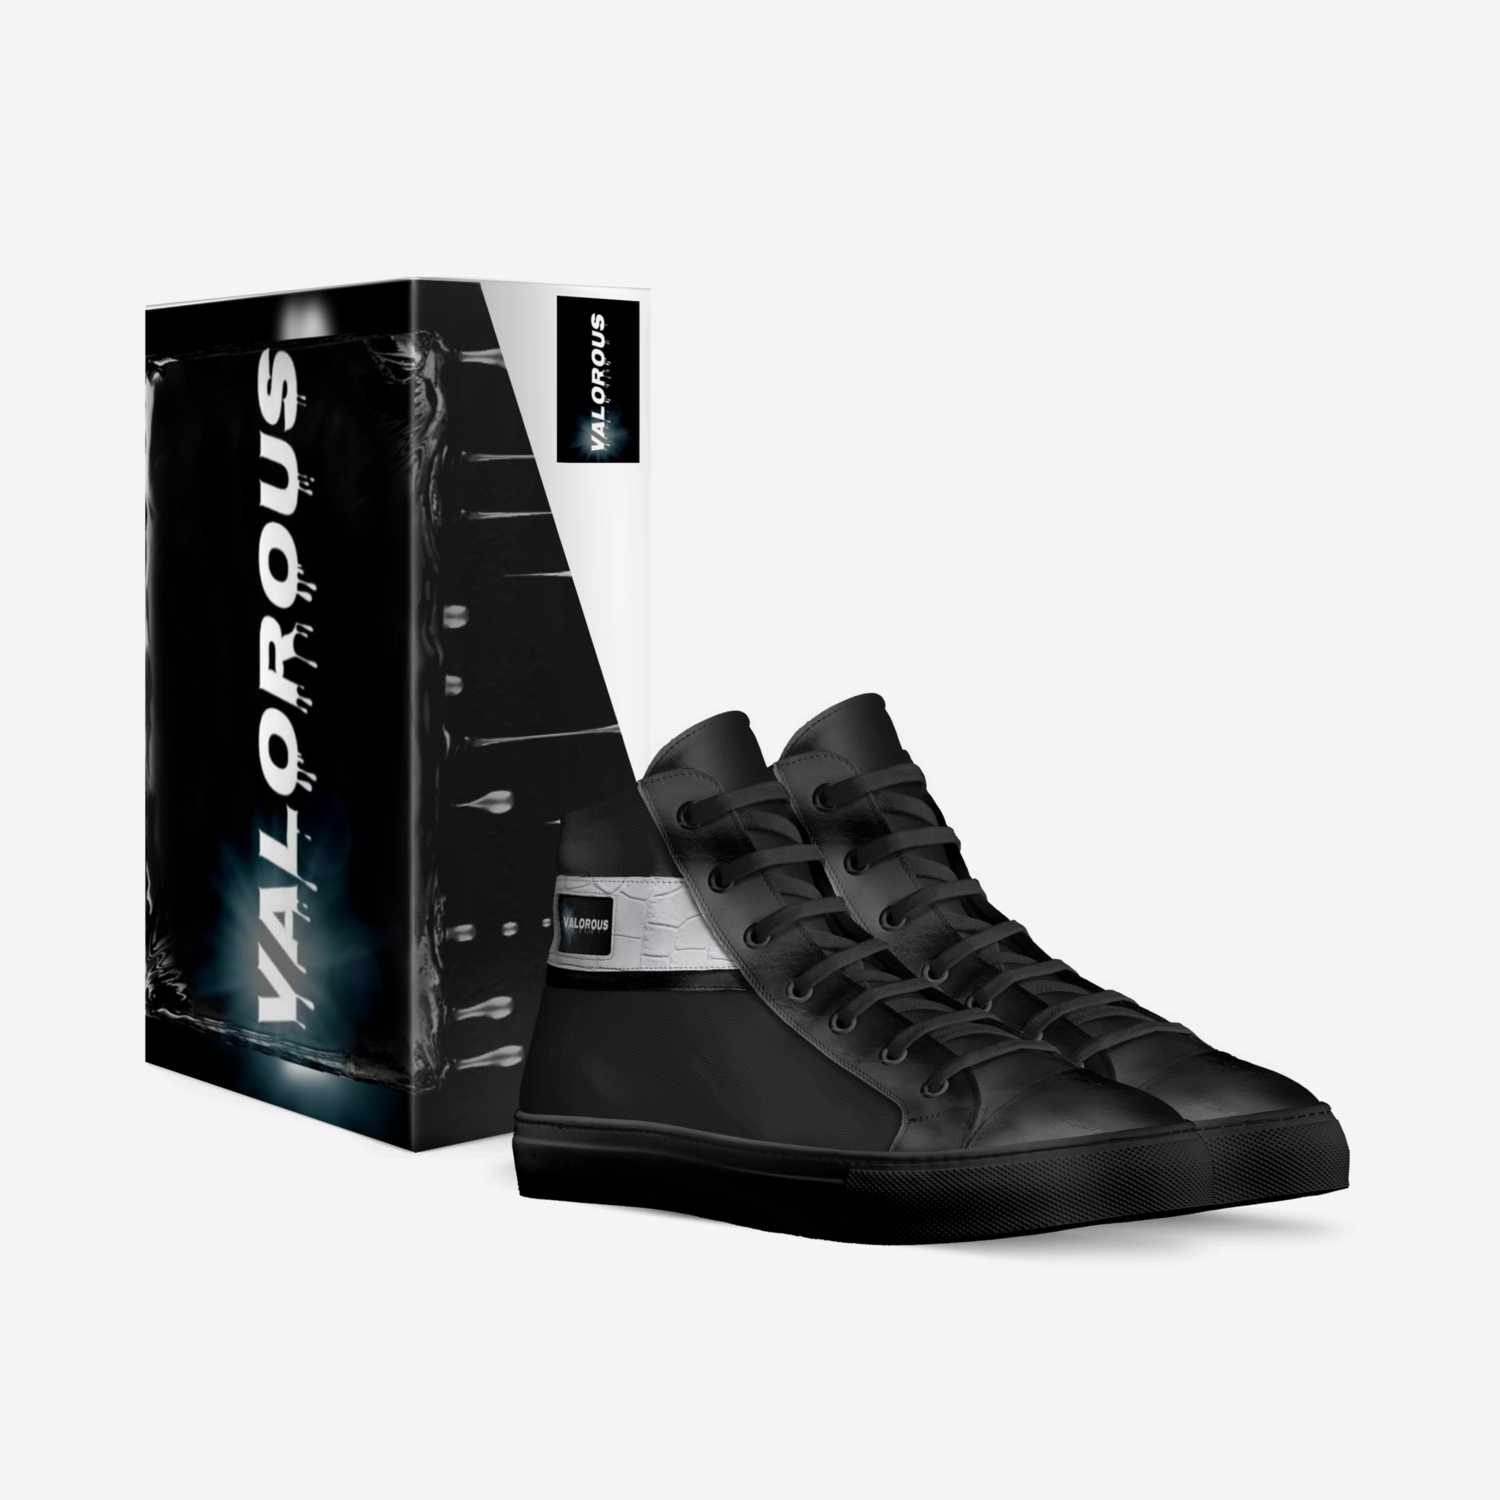 VALOROUS custom made in Italy shoes by Marcus Sullivan | Box view